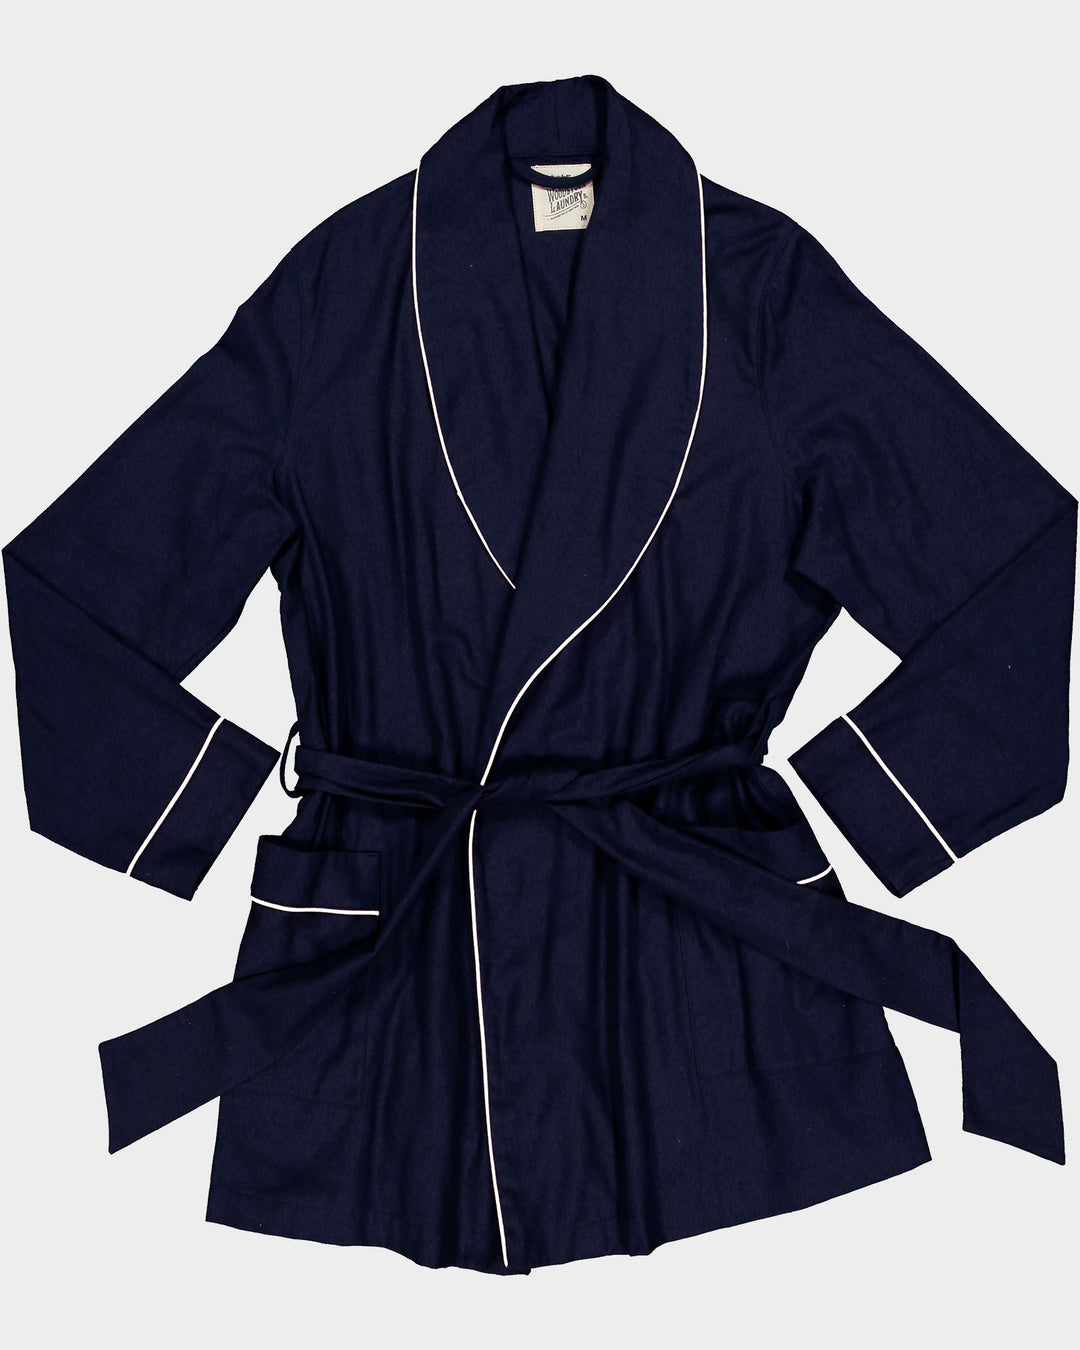 Womens Flannel Dressing Gown Navy with White Piping Flatpack - Woodstock Laundry UK